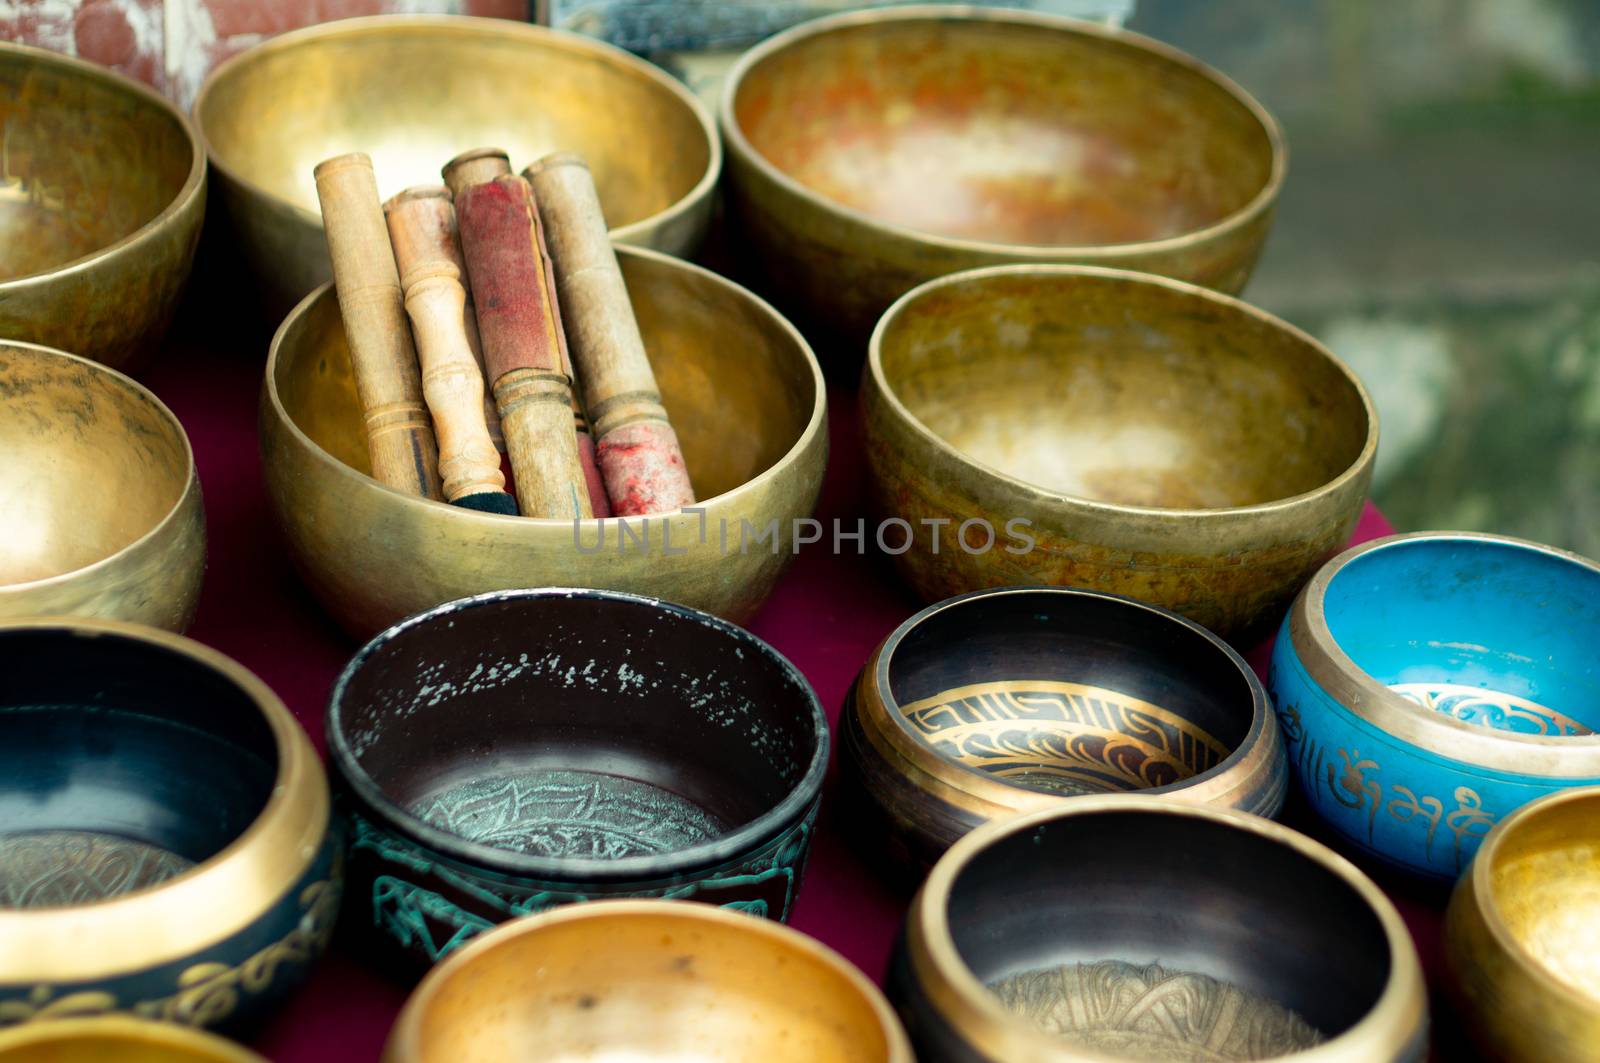 Brass singing musical bowls placed in a shop in mcleodganj himac by Shalinimathur